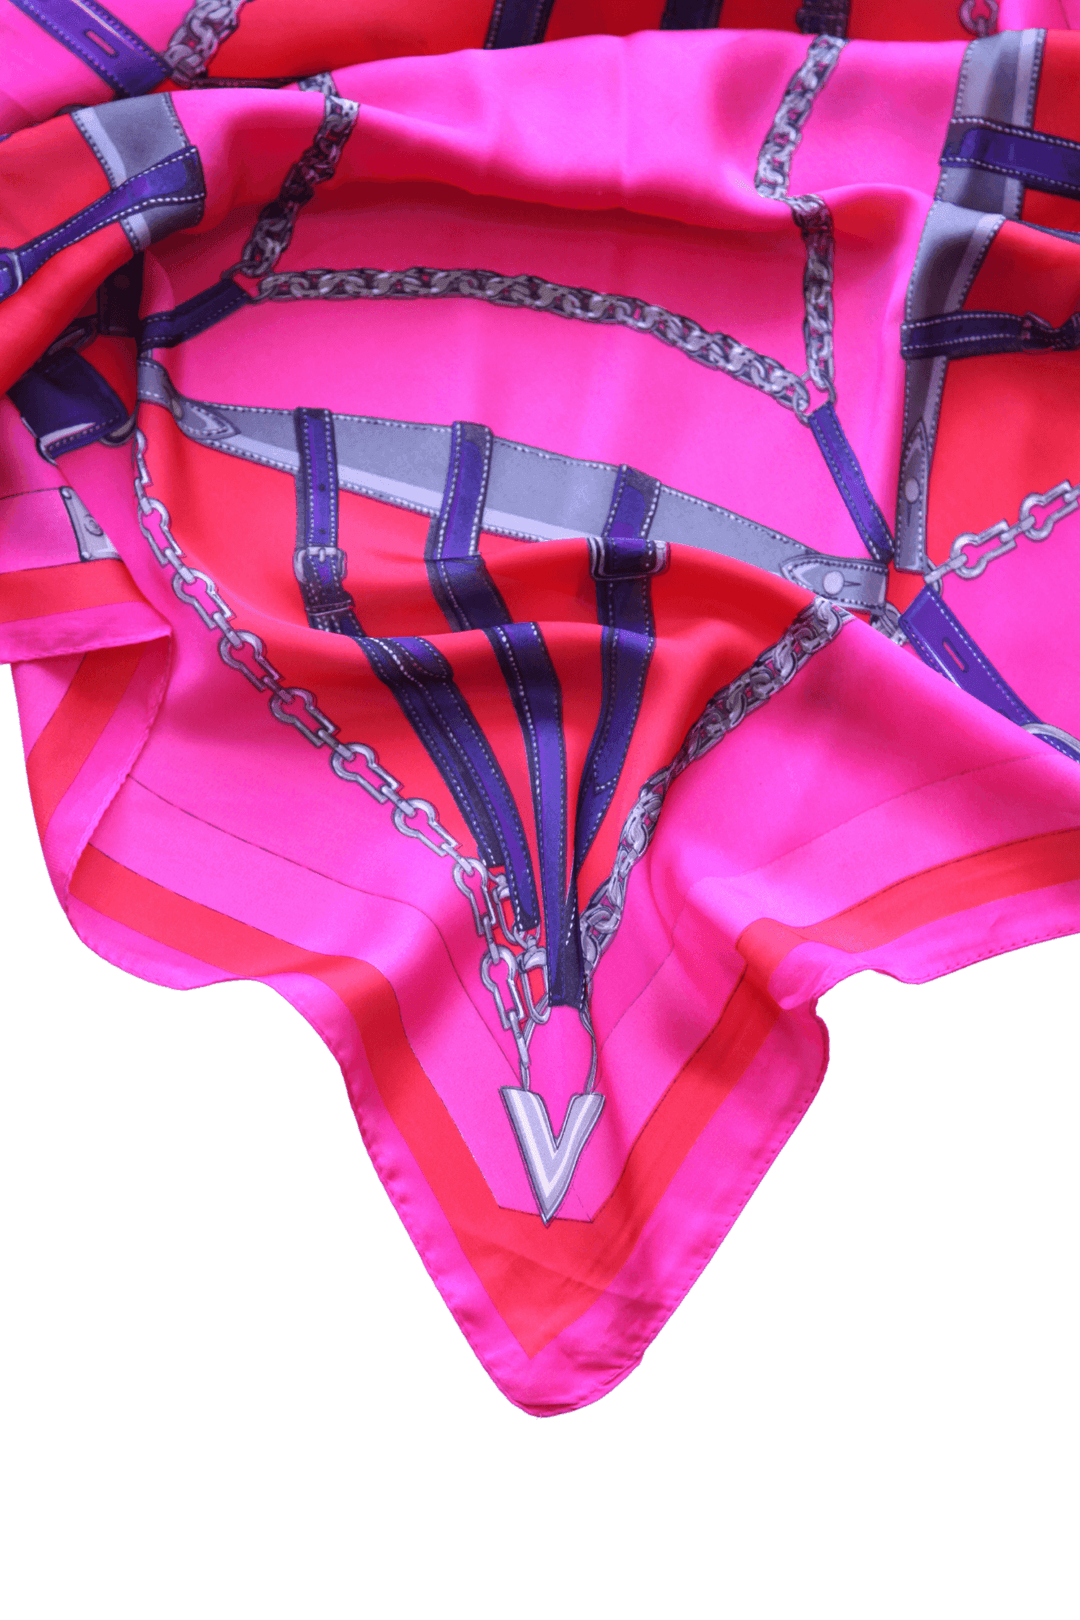 Stunning pink and red silky scarf with belts on it in Houston Texas